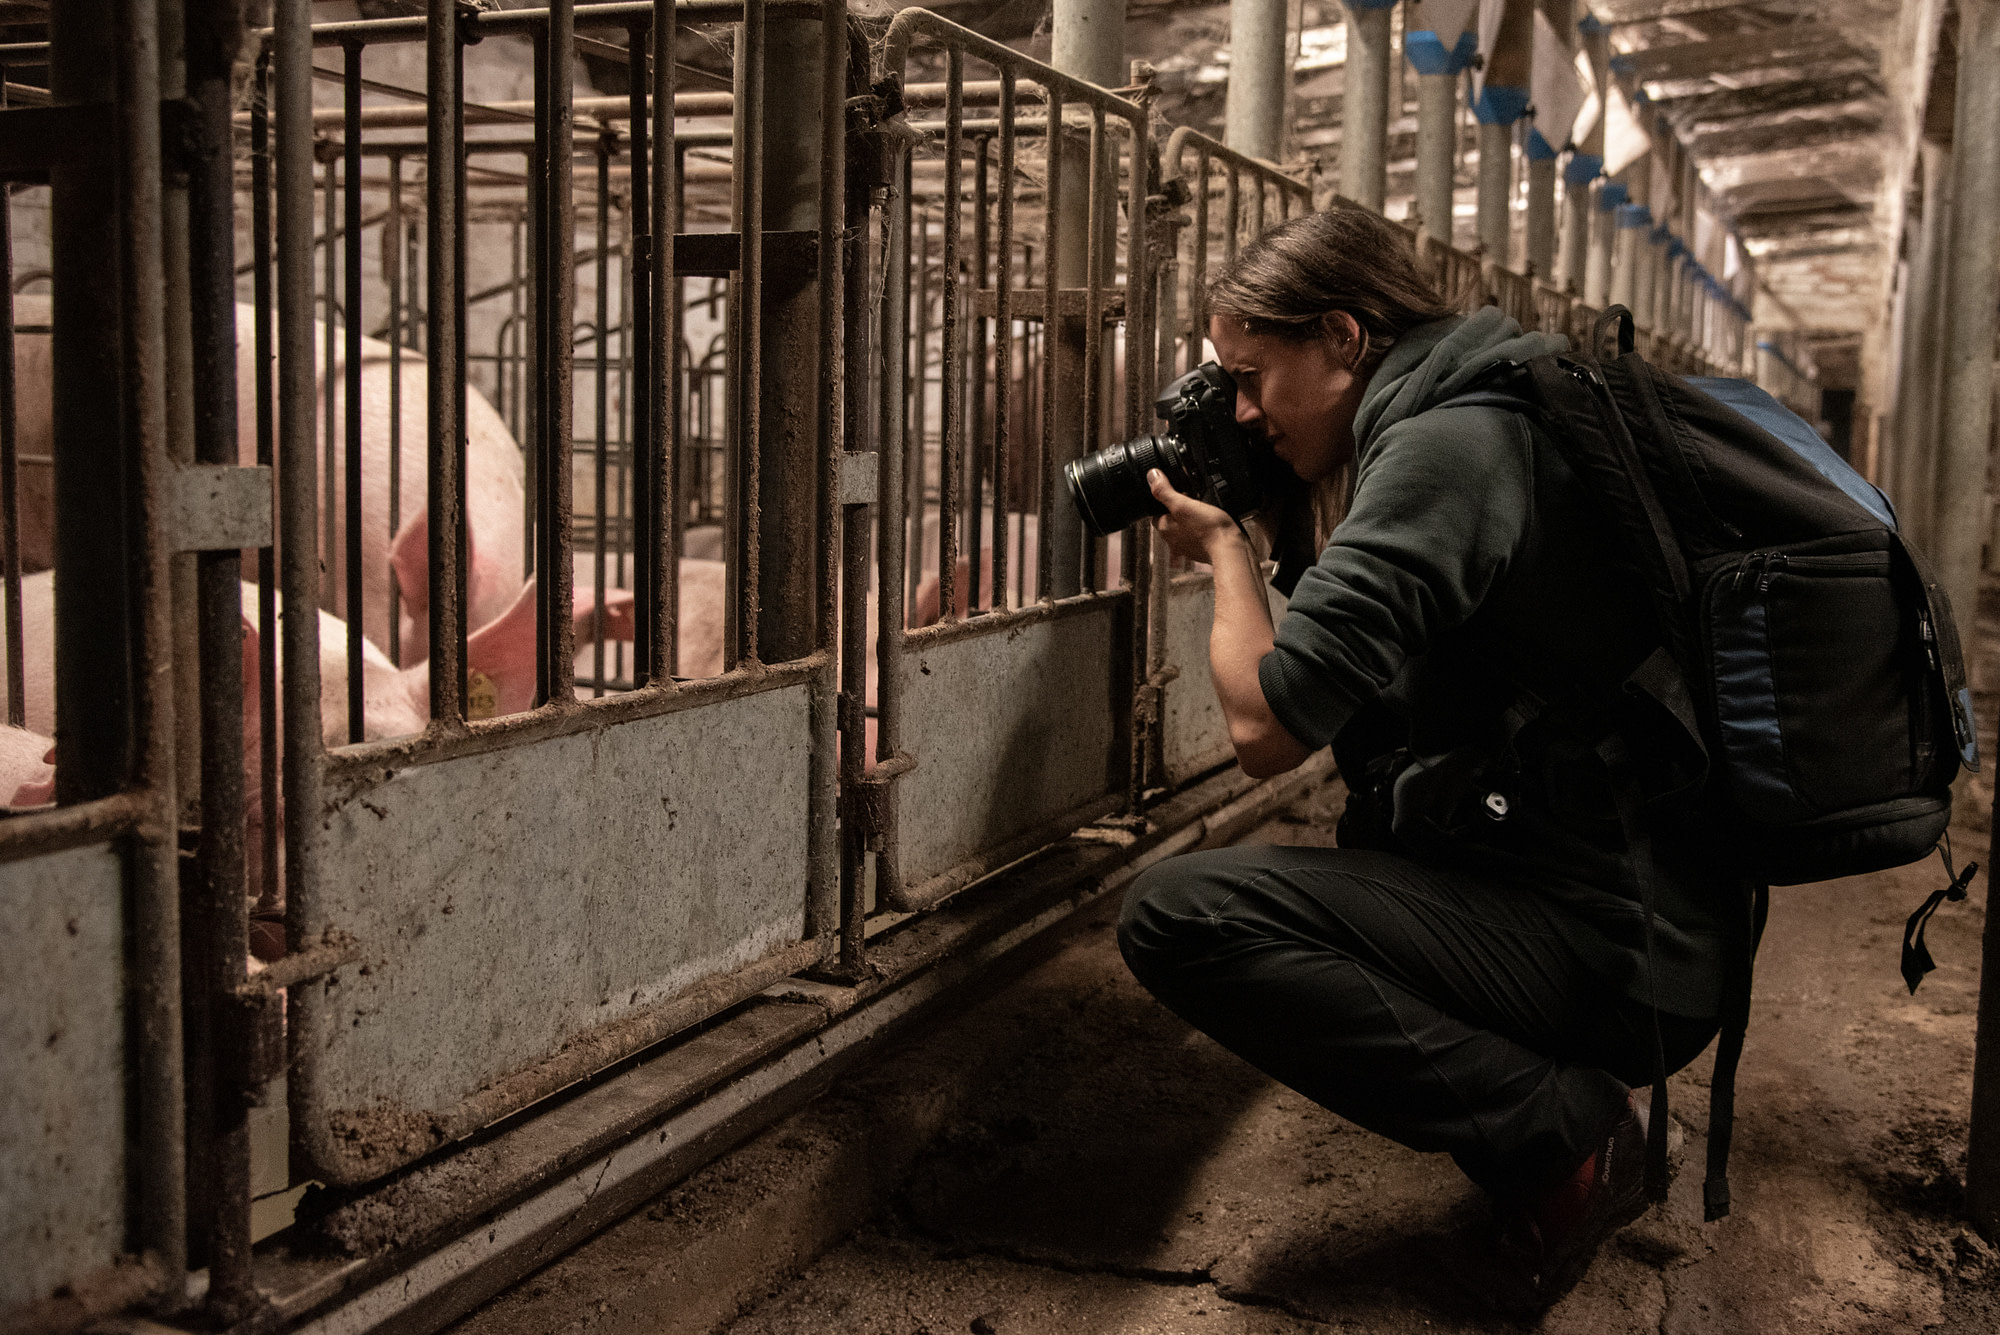 Jo-Anne McArthur photographs sows in their gestation crates at a farm. Italy, 2015. Stefano Belacchi / Essere Animali / We Animals Media